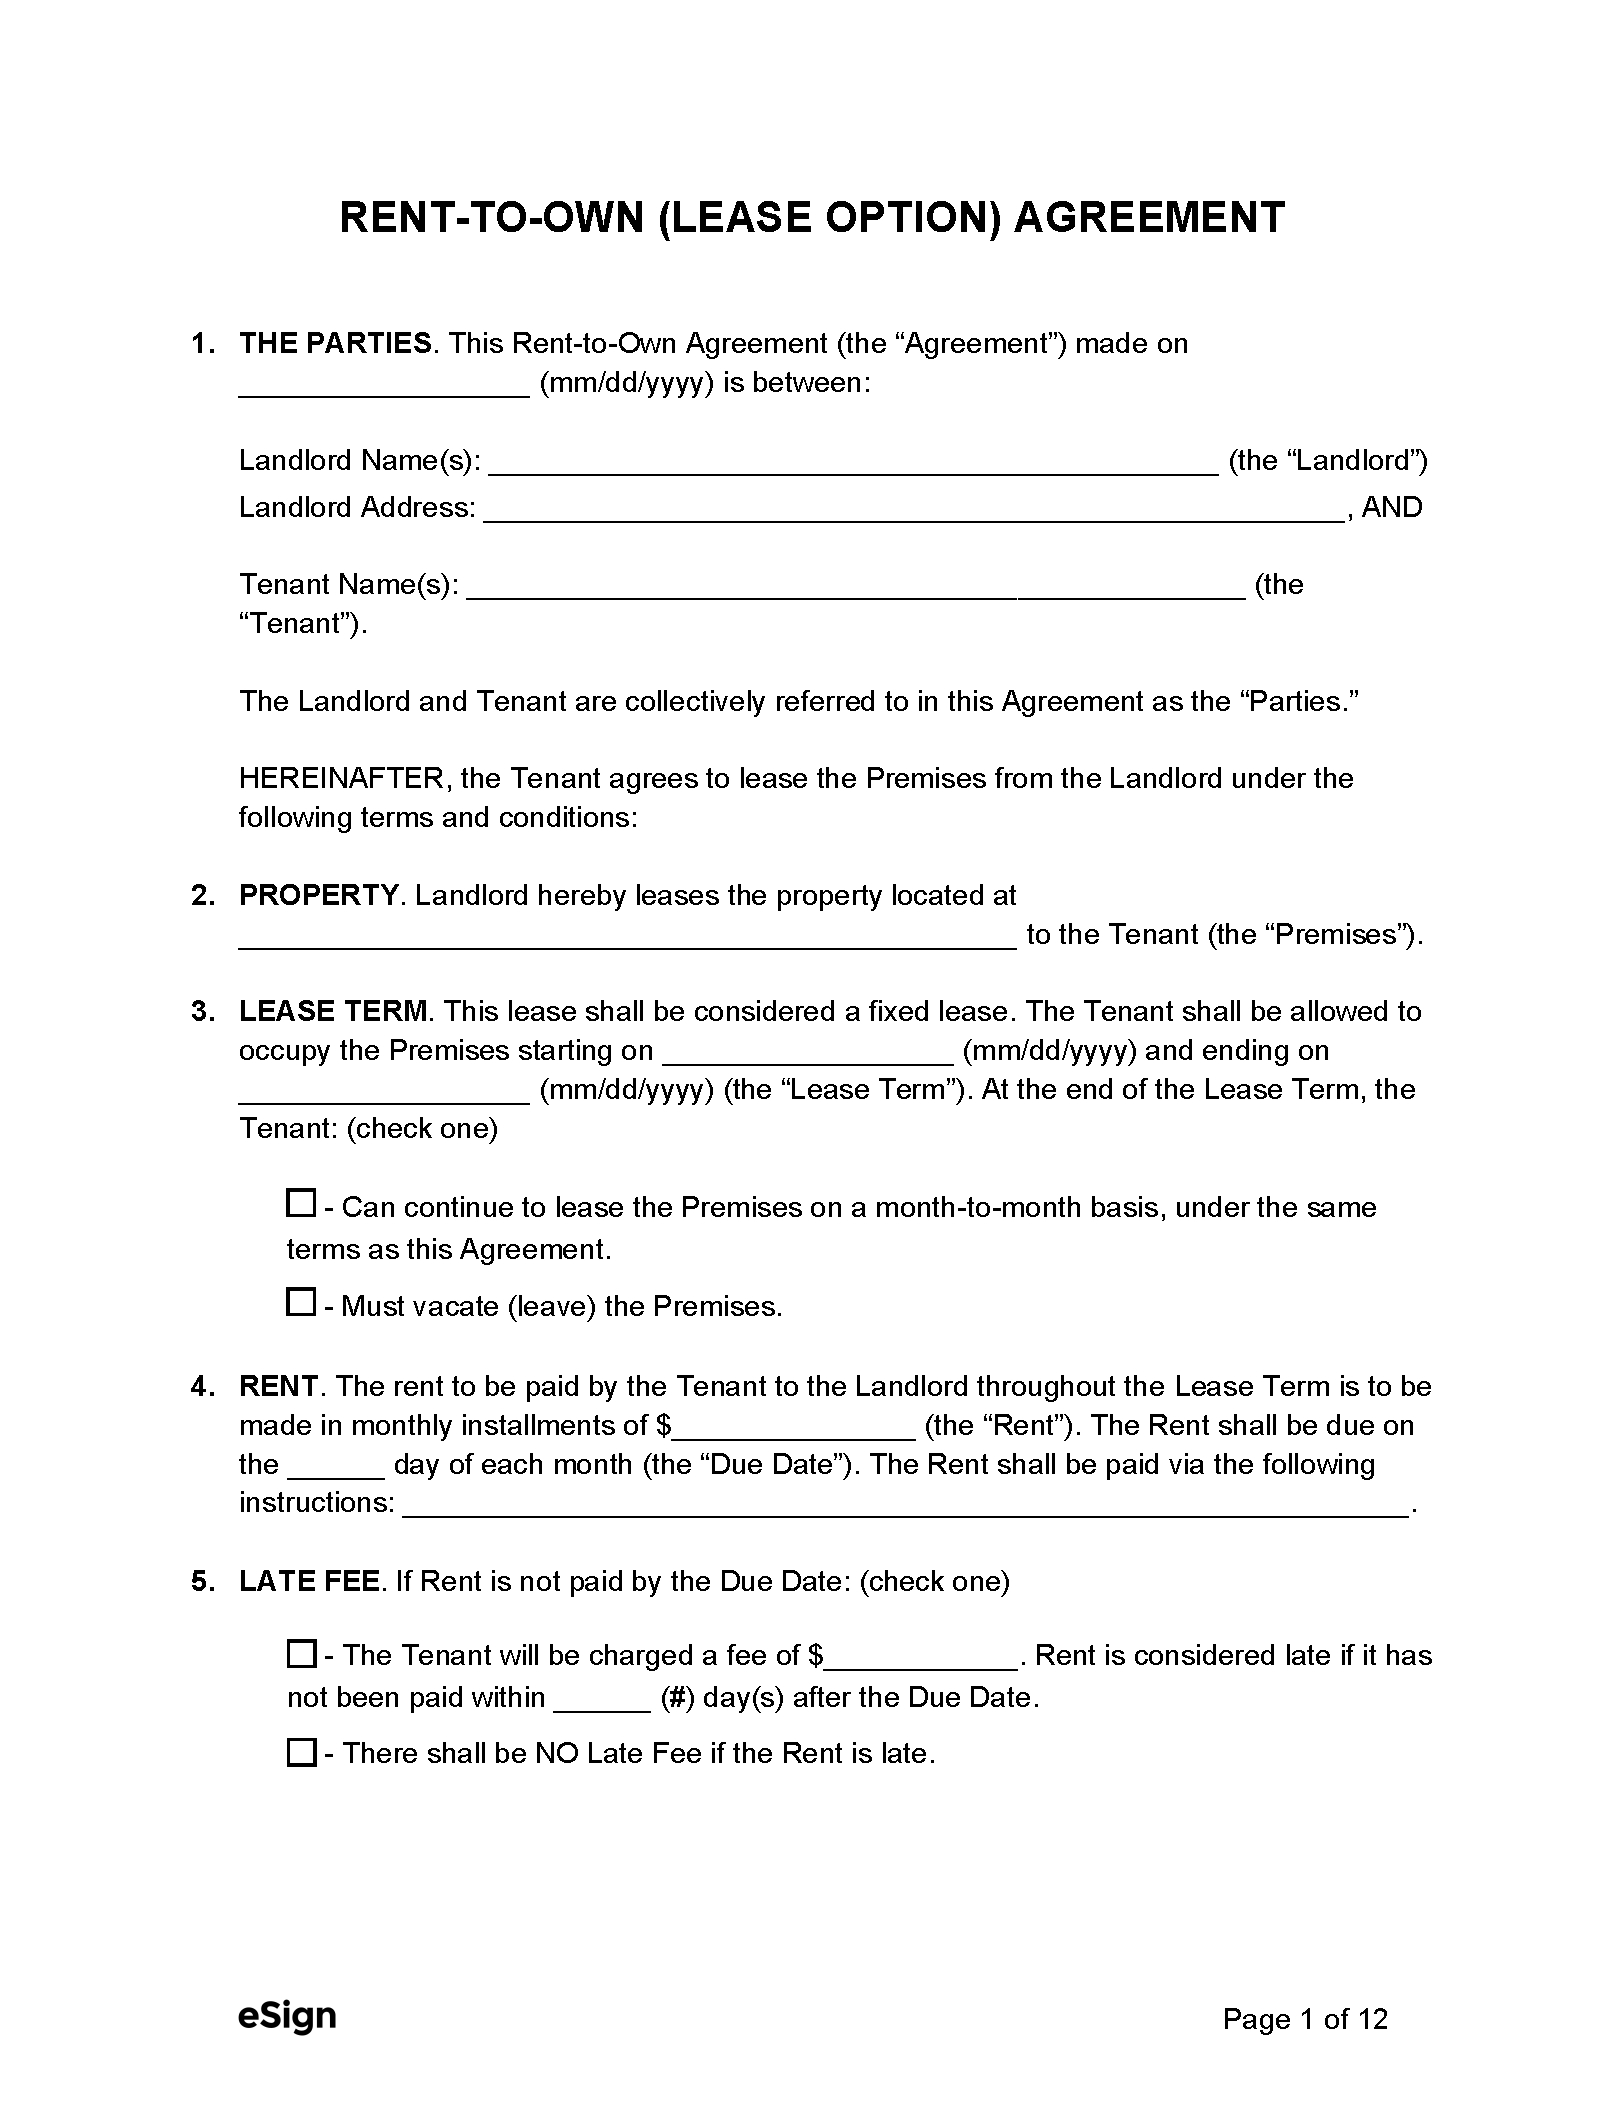 Free Rent-To-Own (Lease Option) Agreement | Pdf | Word - Free Printable Basic Rental Agreement For Texas